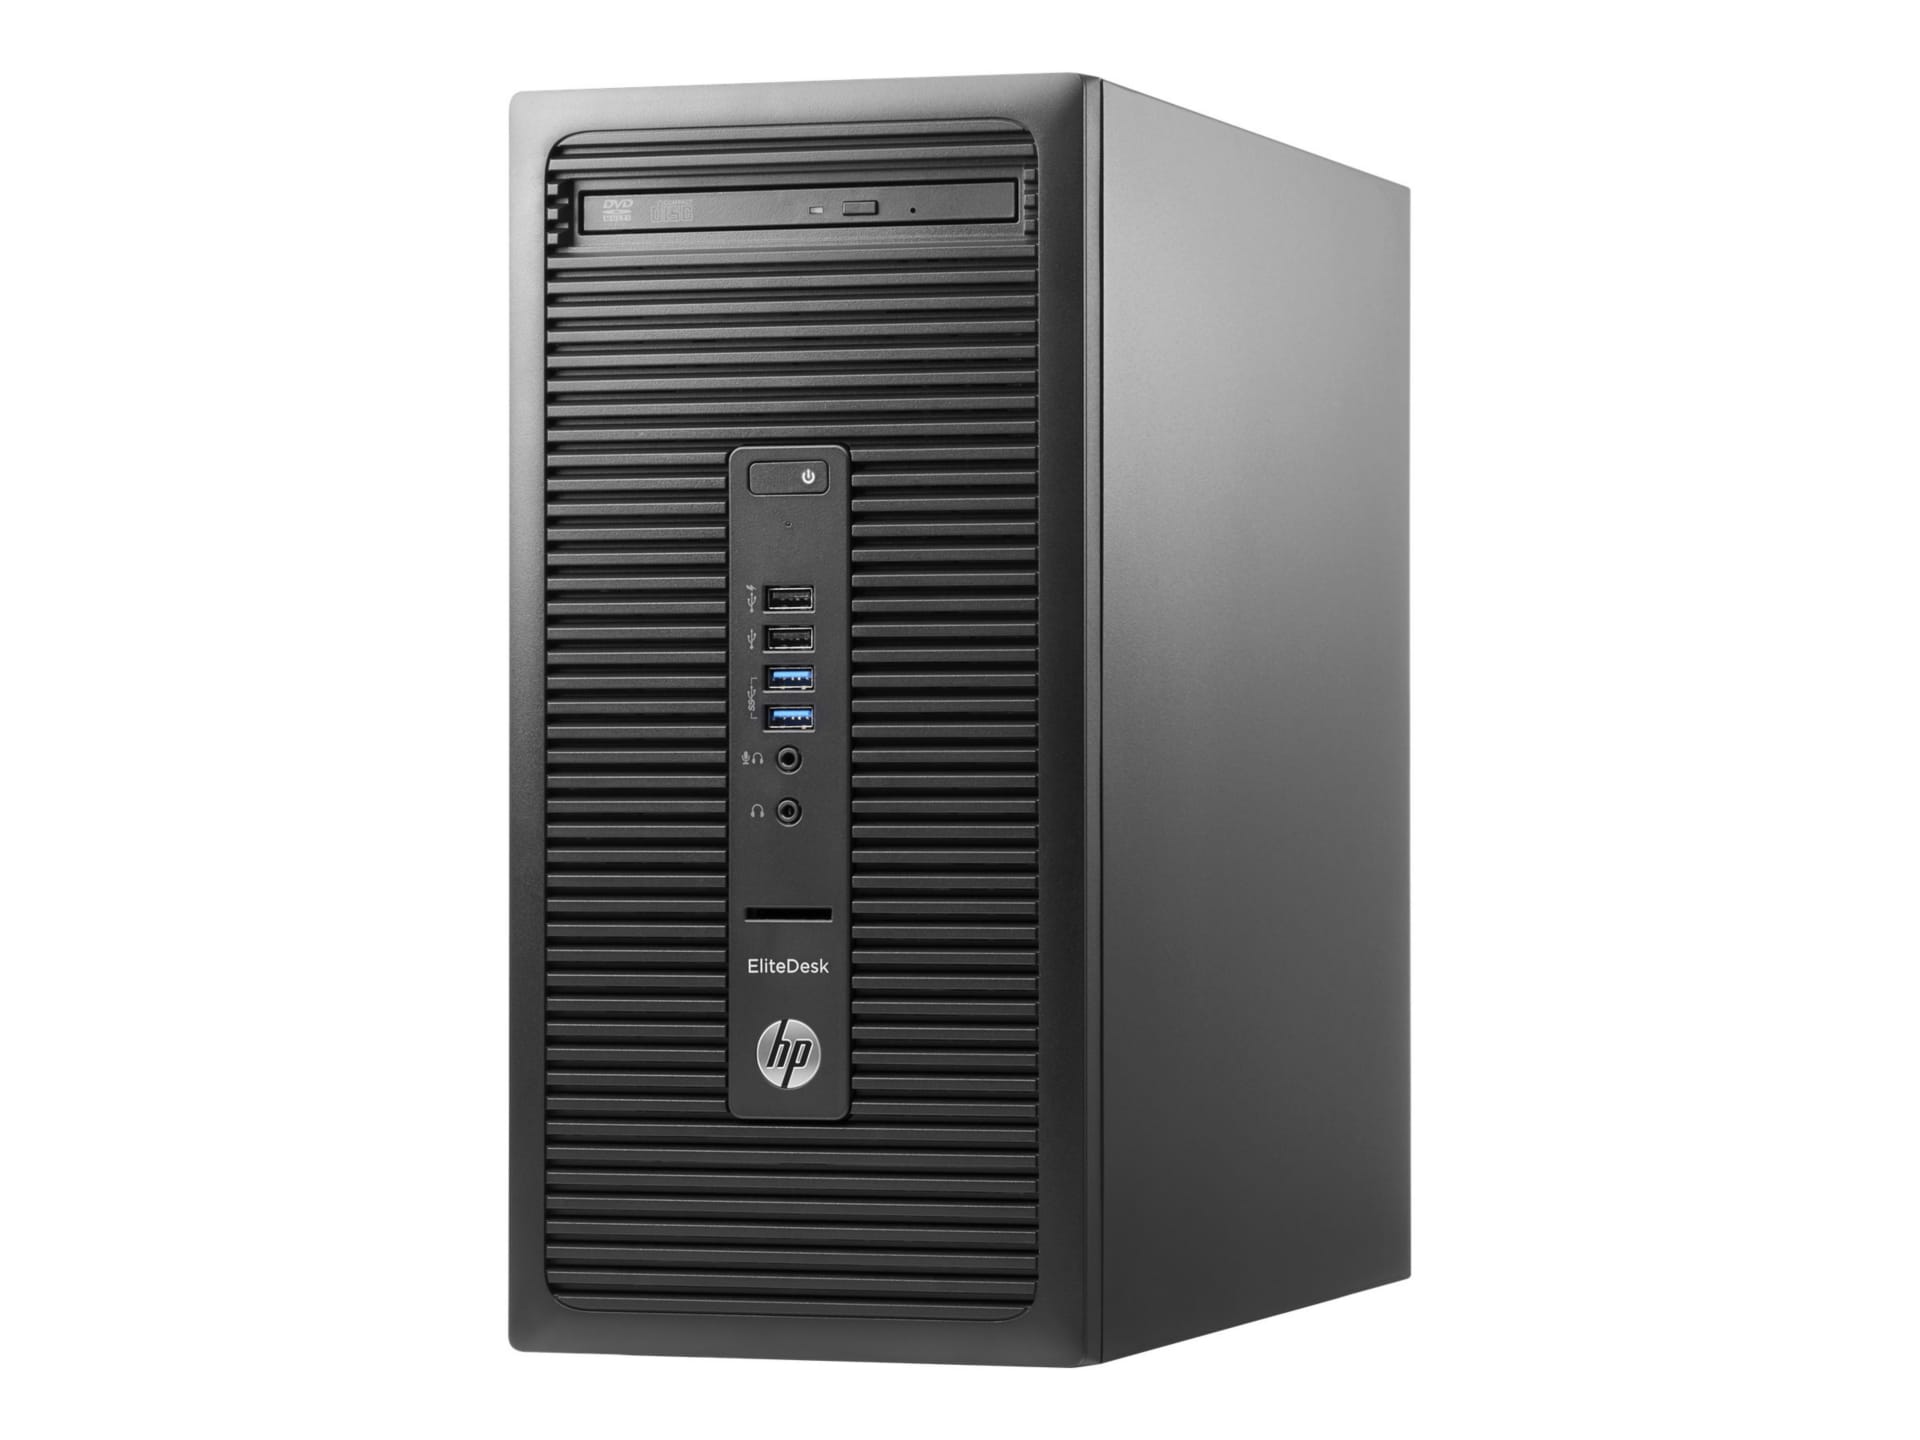 HP EliteDesk 705 G3 - micro tower - A8 PRO-9600 3.1 GHz - 8 GB - 500 GB - US